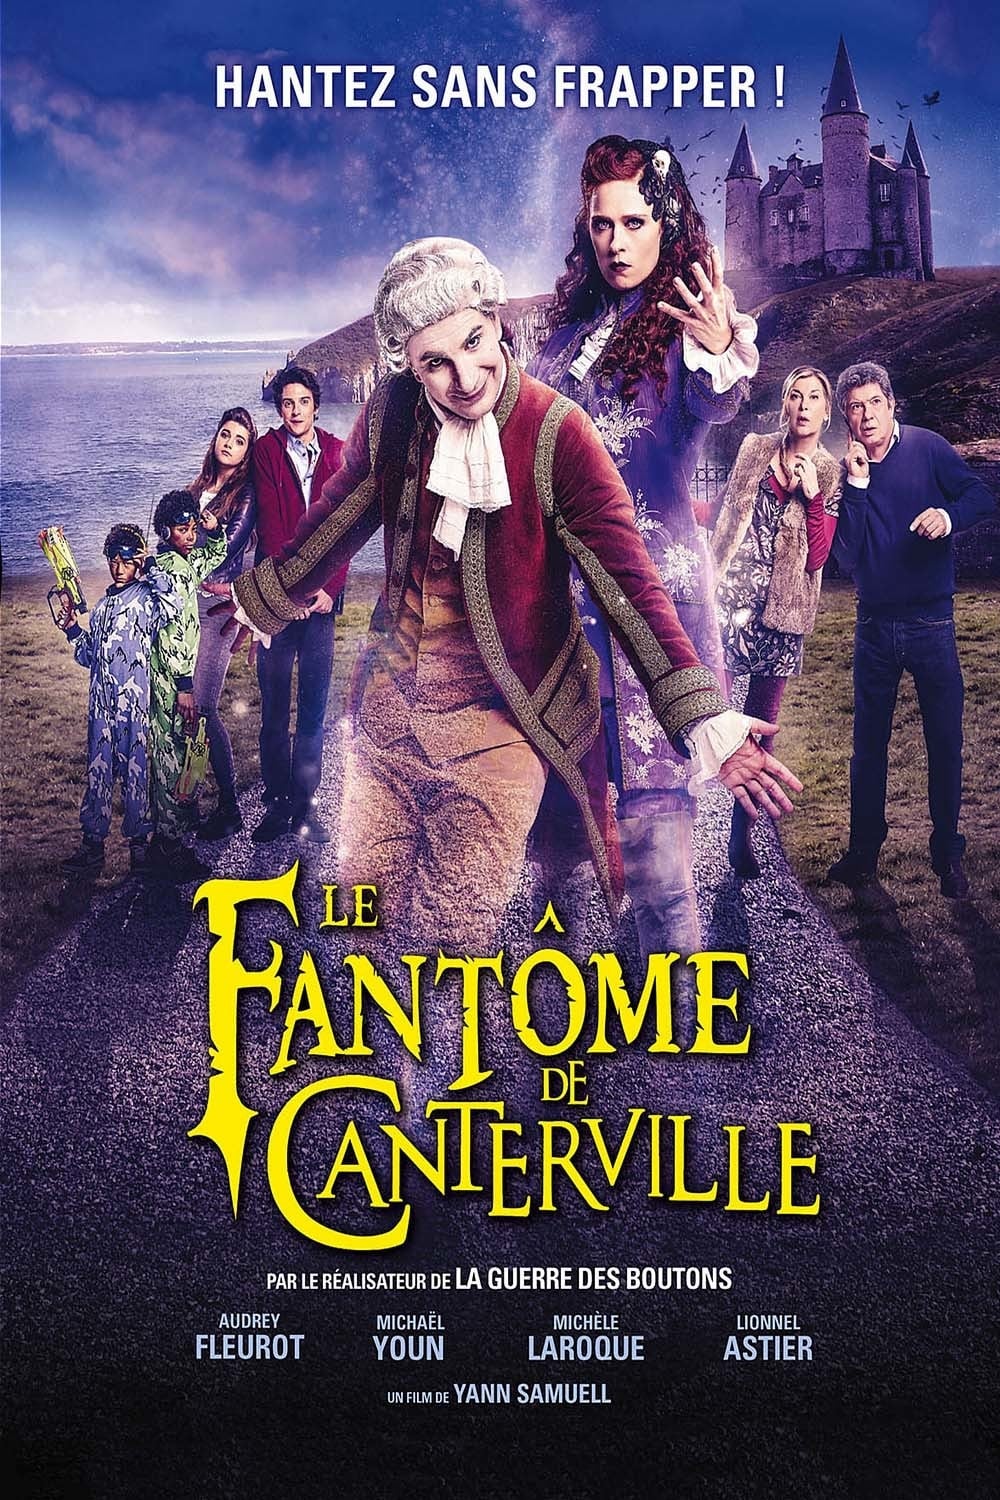 The Canterville Ghost (2016)